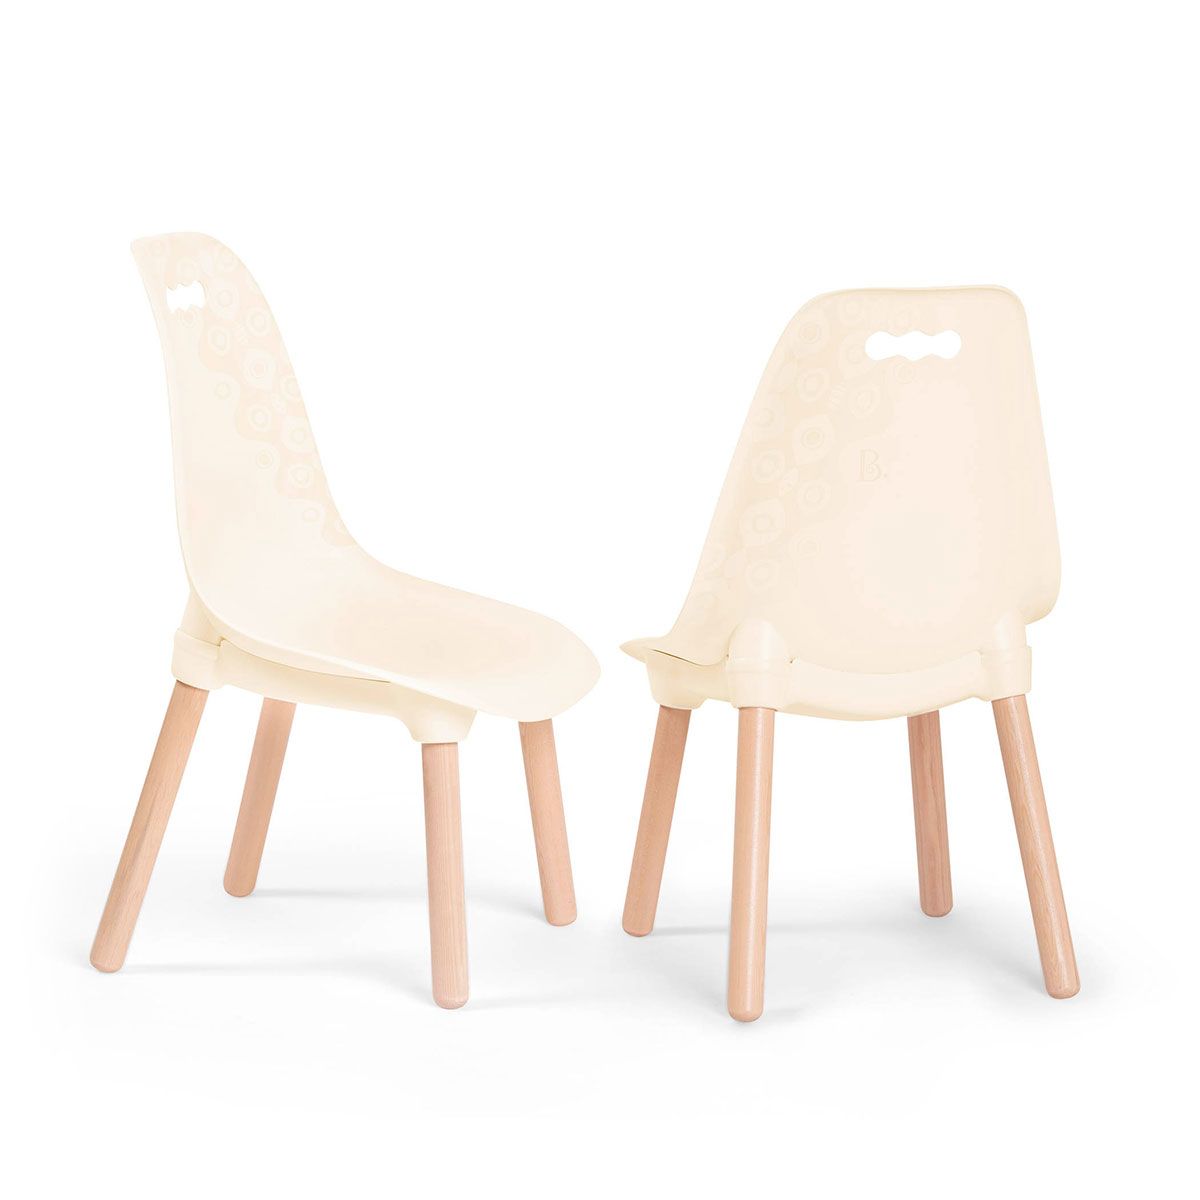 Ivory toy chairs